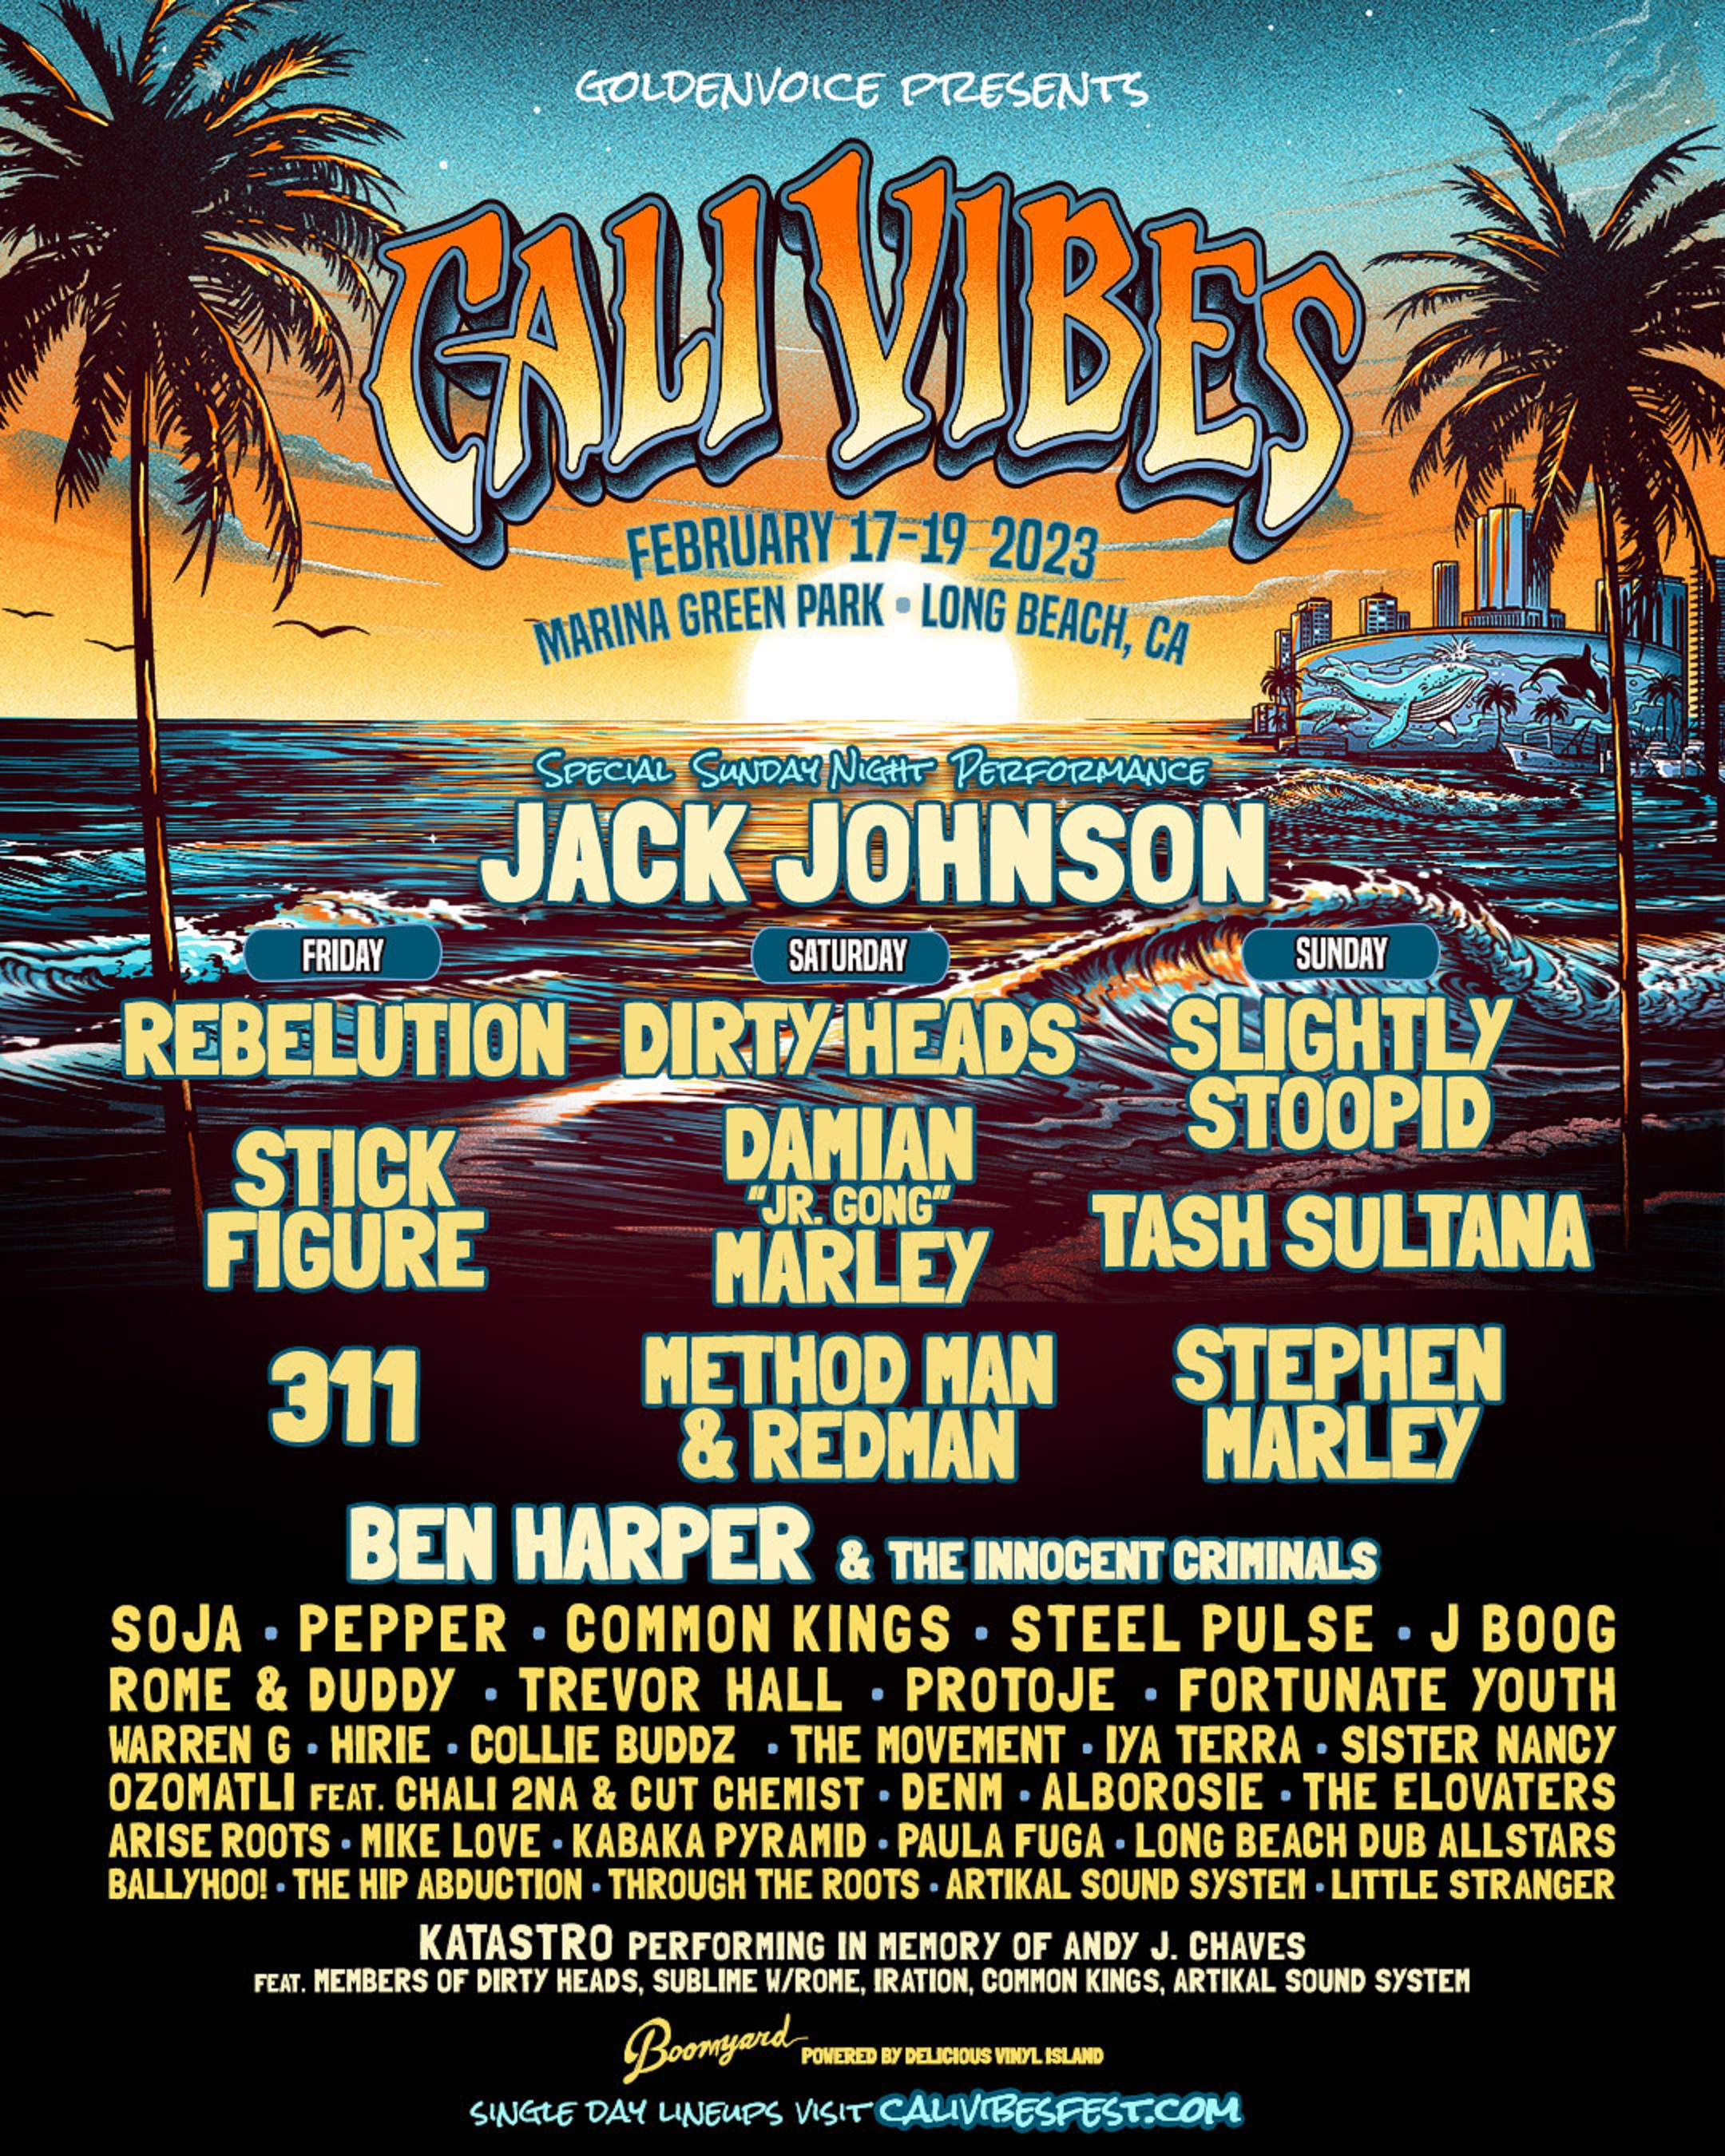 Cali Vibes Fest February 17-19 2023 🌊 Passes + Hotel Packages On Sale Now